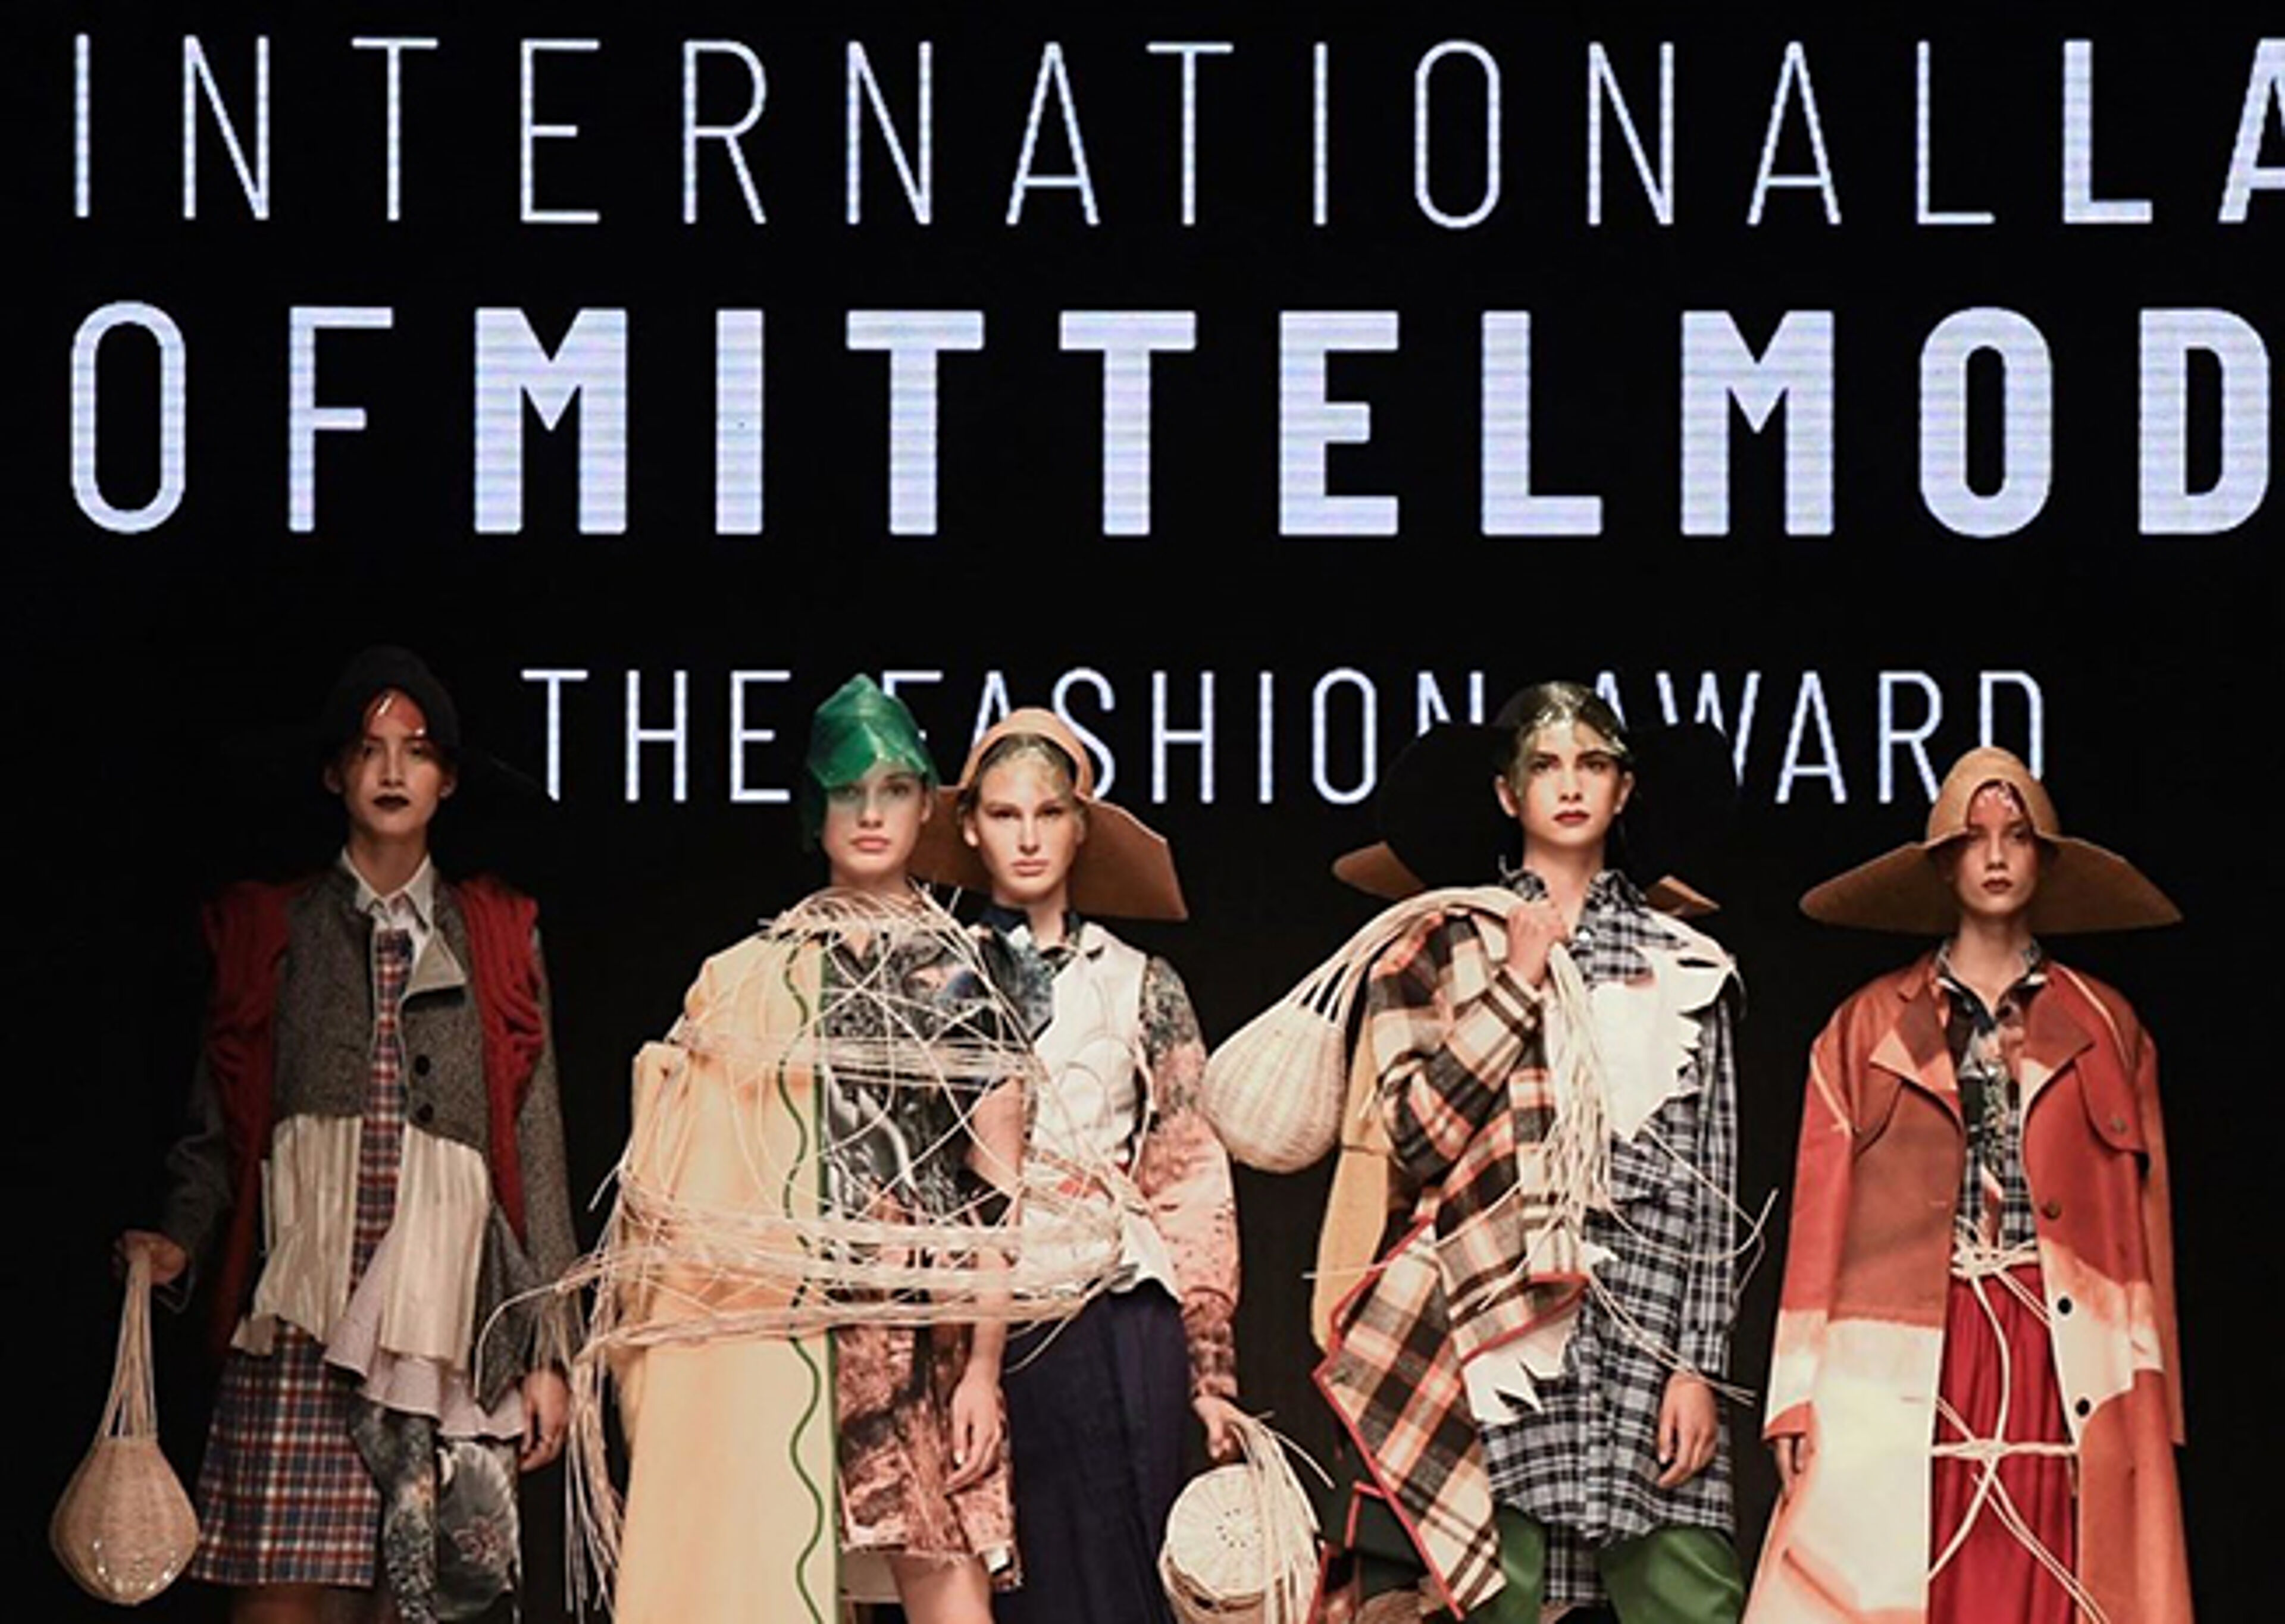 Models display eclectic designs at an international fashion show, embodying avant-garde aesthetics with a mix of patterns and textures.